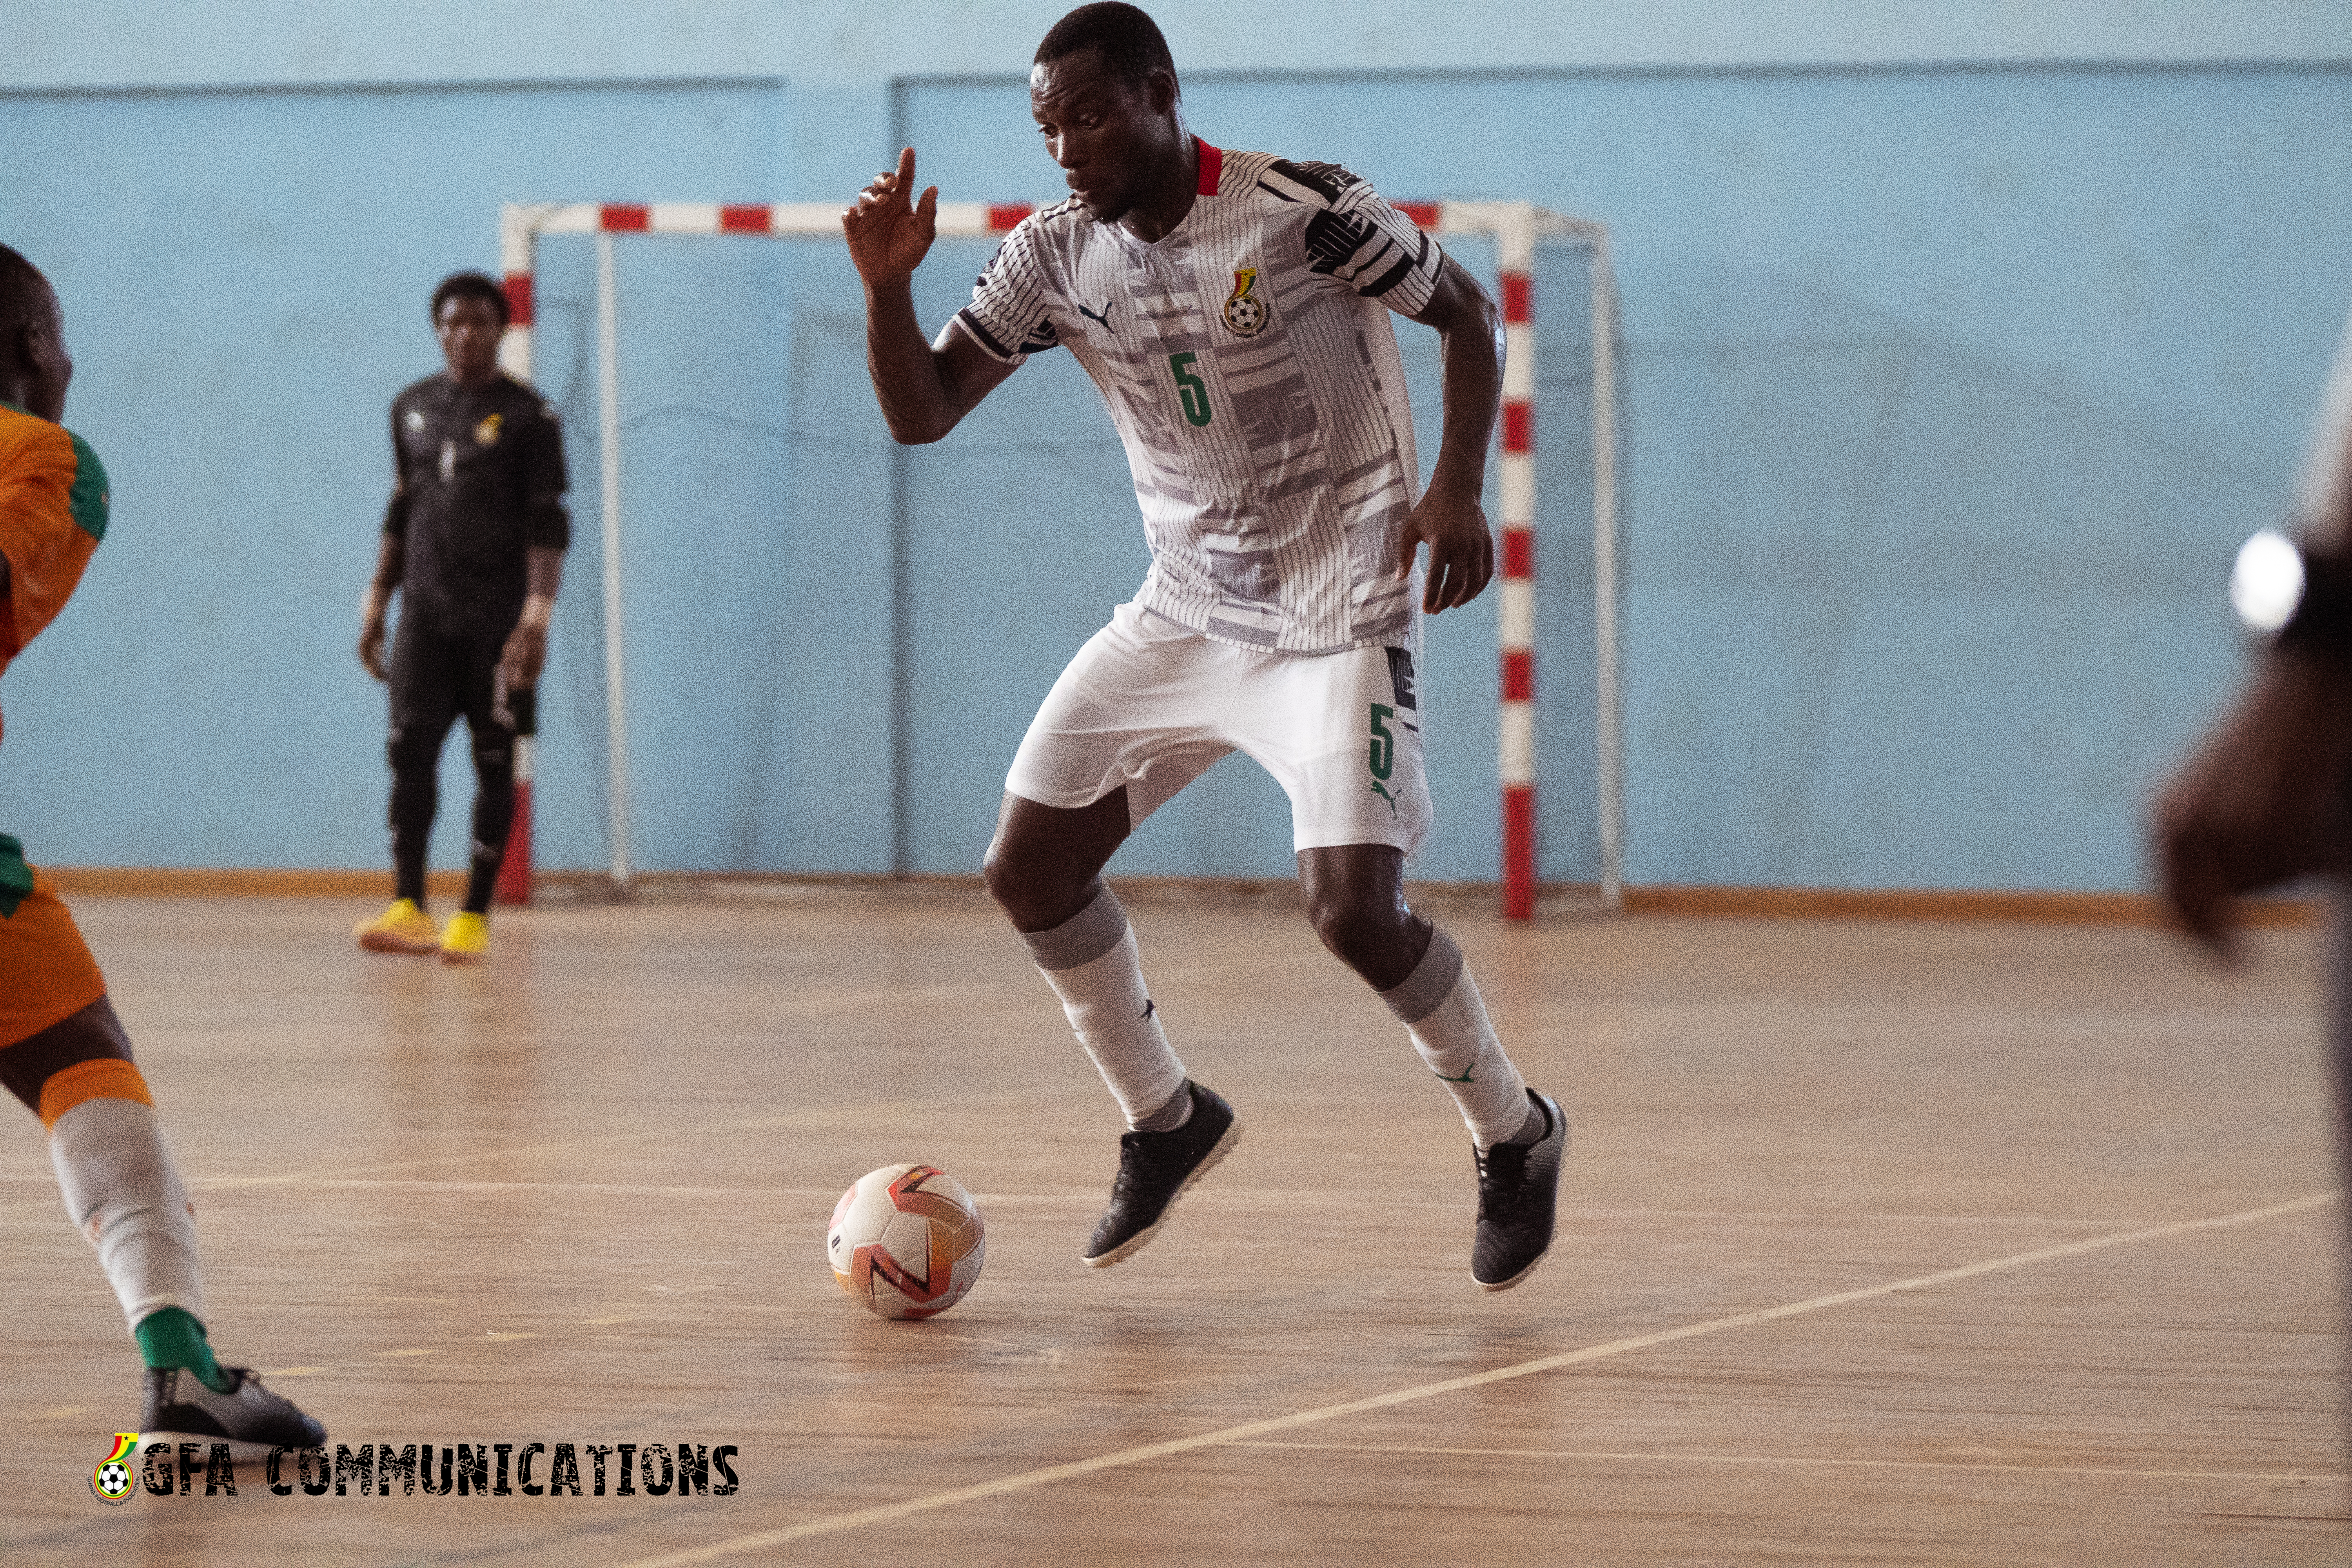 Ghana shock Cote D'Ivoire 6-2 to qualify for Futsal Africa Cup of Nations